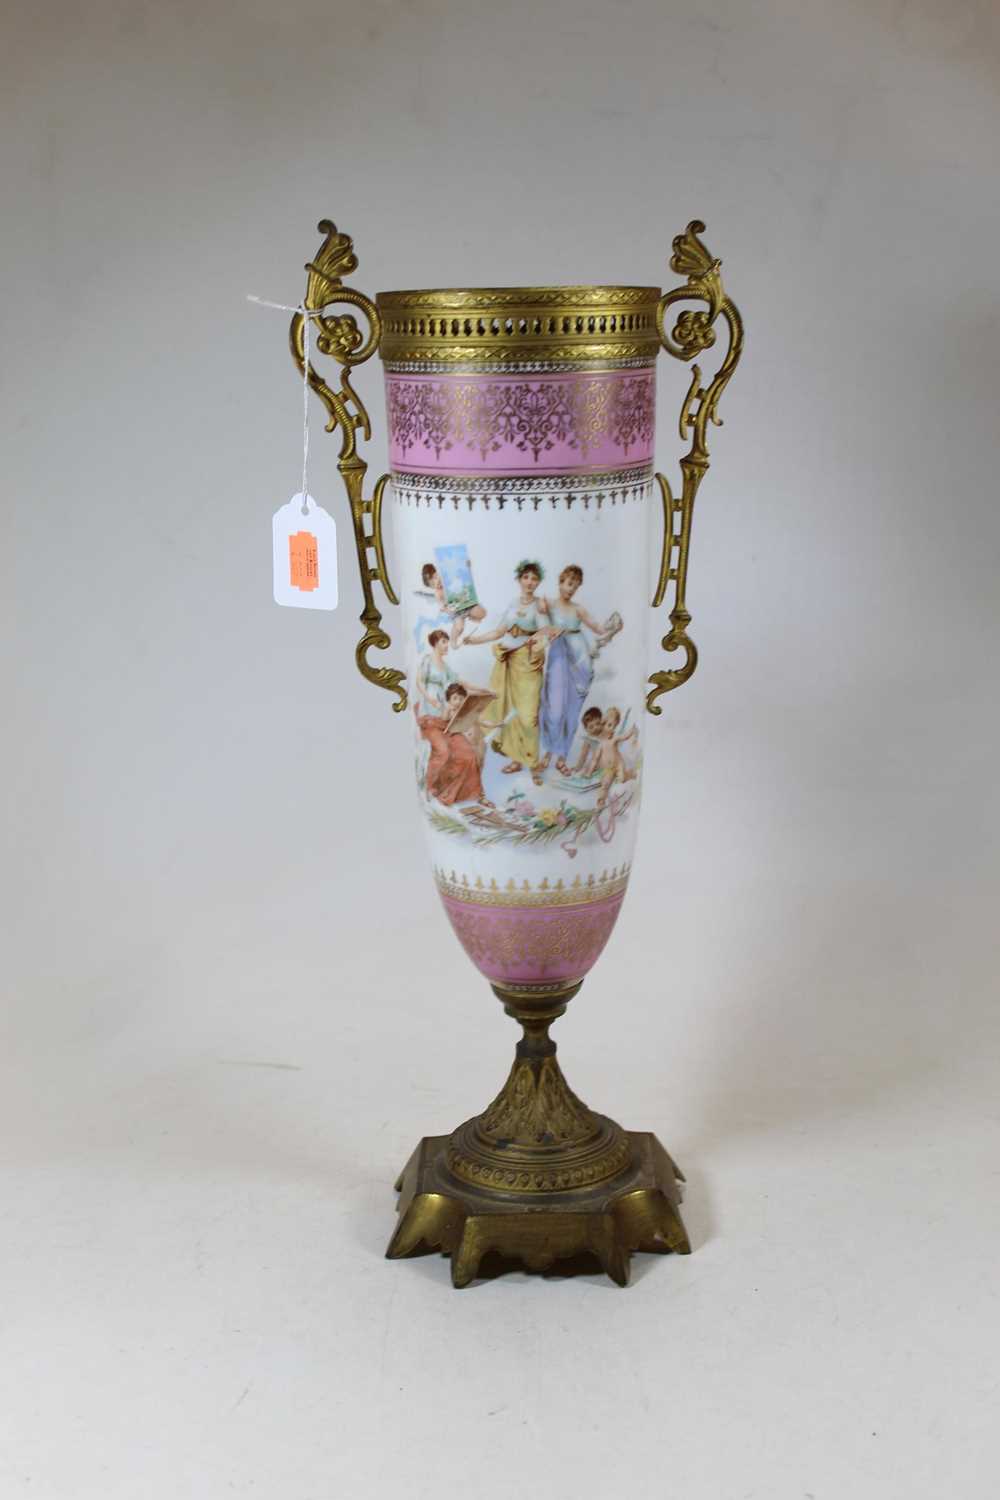 A circa 1900 Continental porcelain and gilt metal mounted urn, decorated with allegorical scenes, - Image 2 of 6